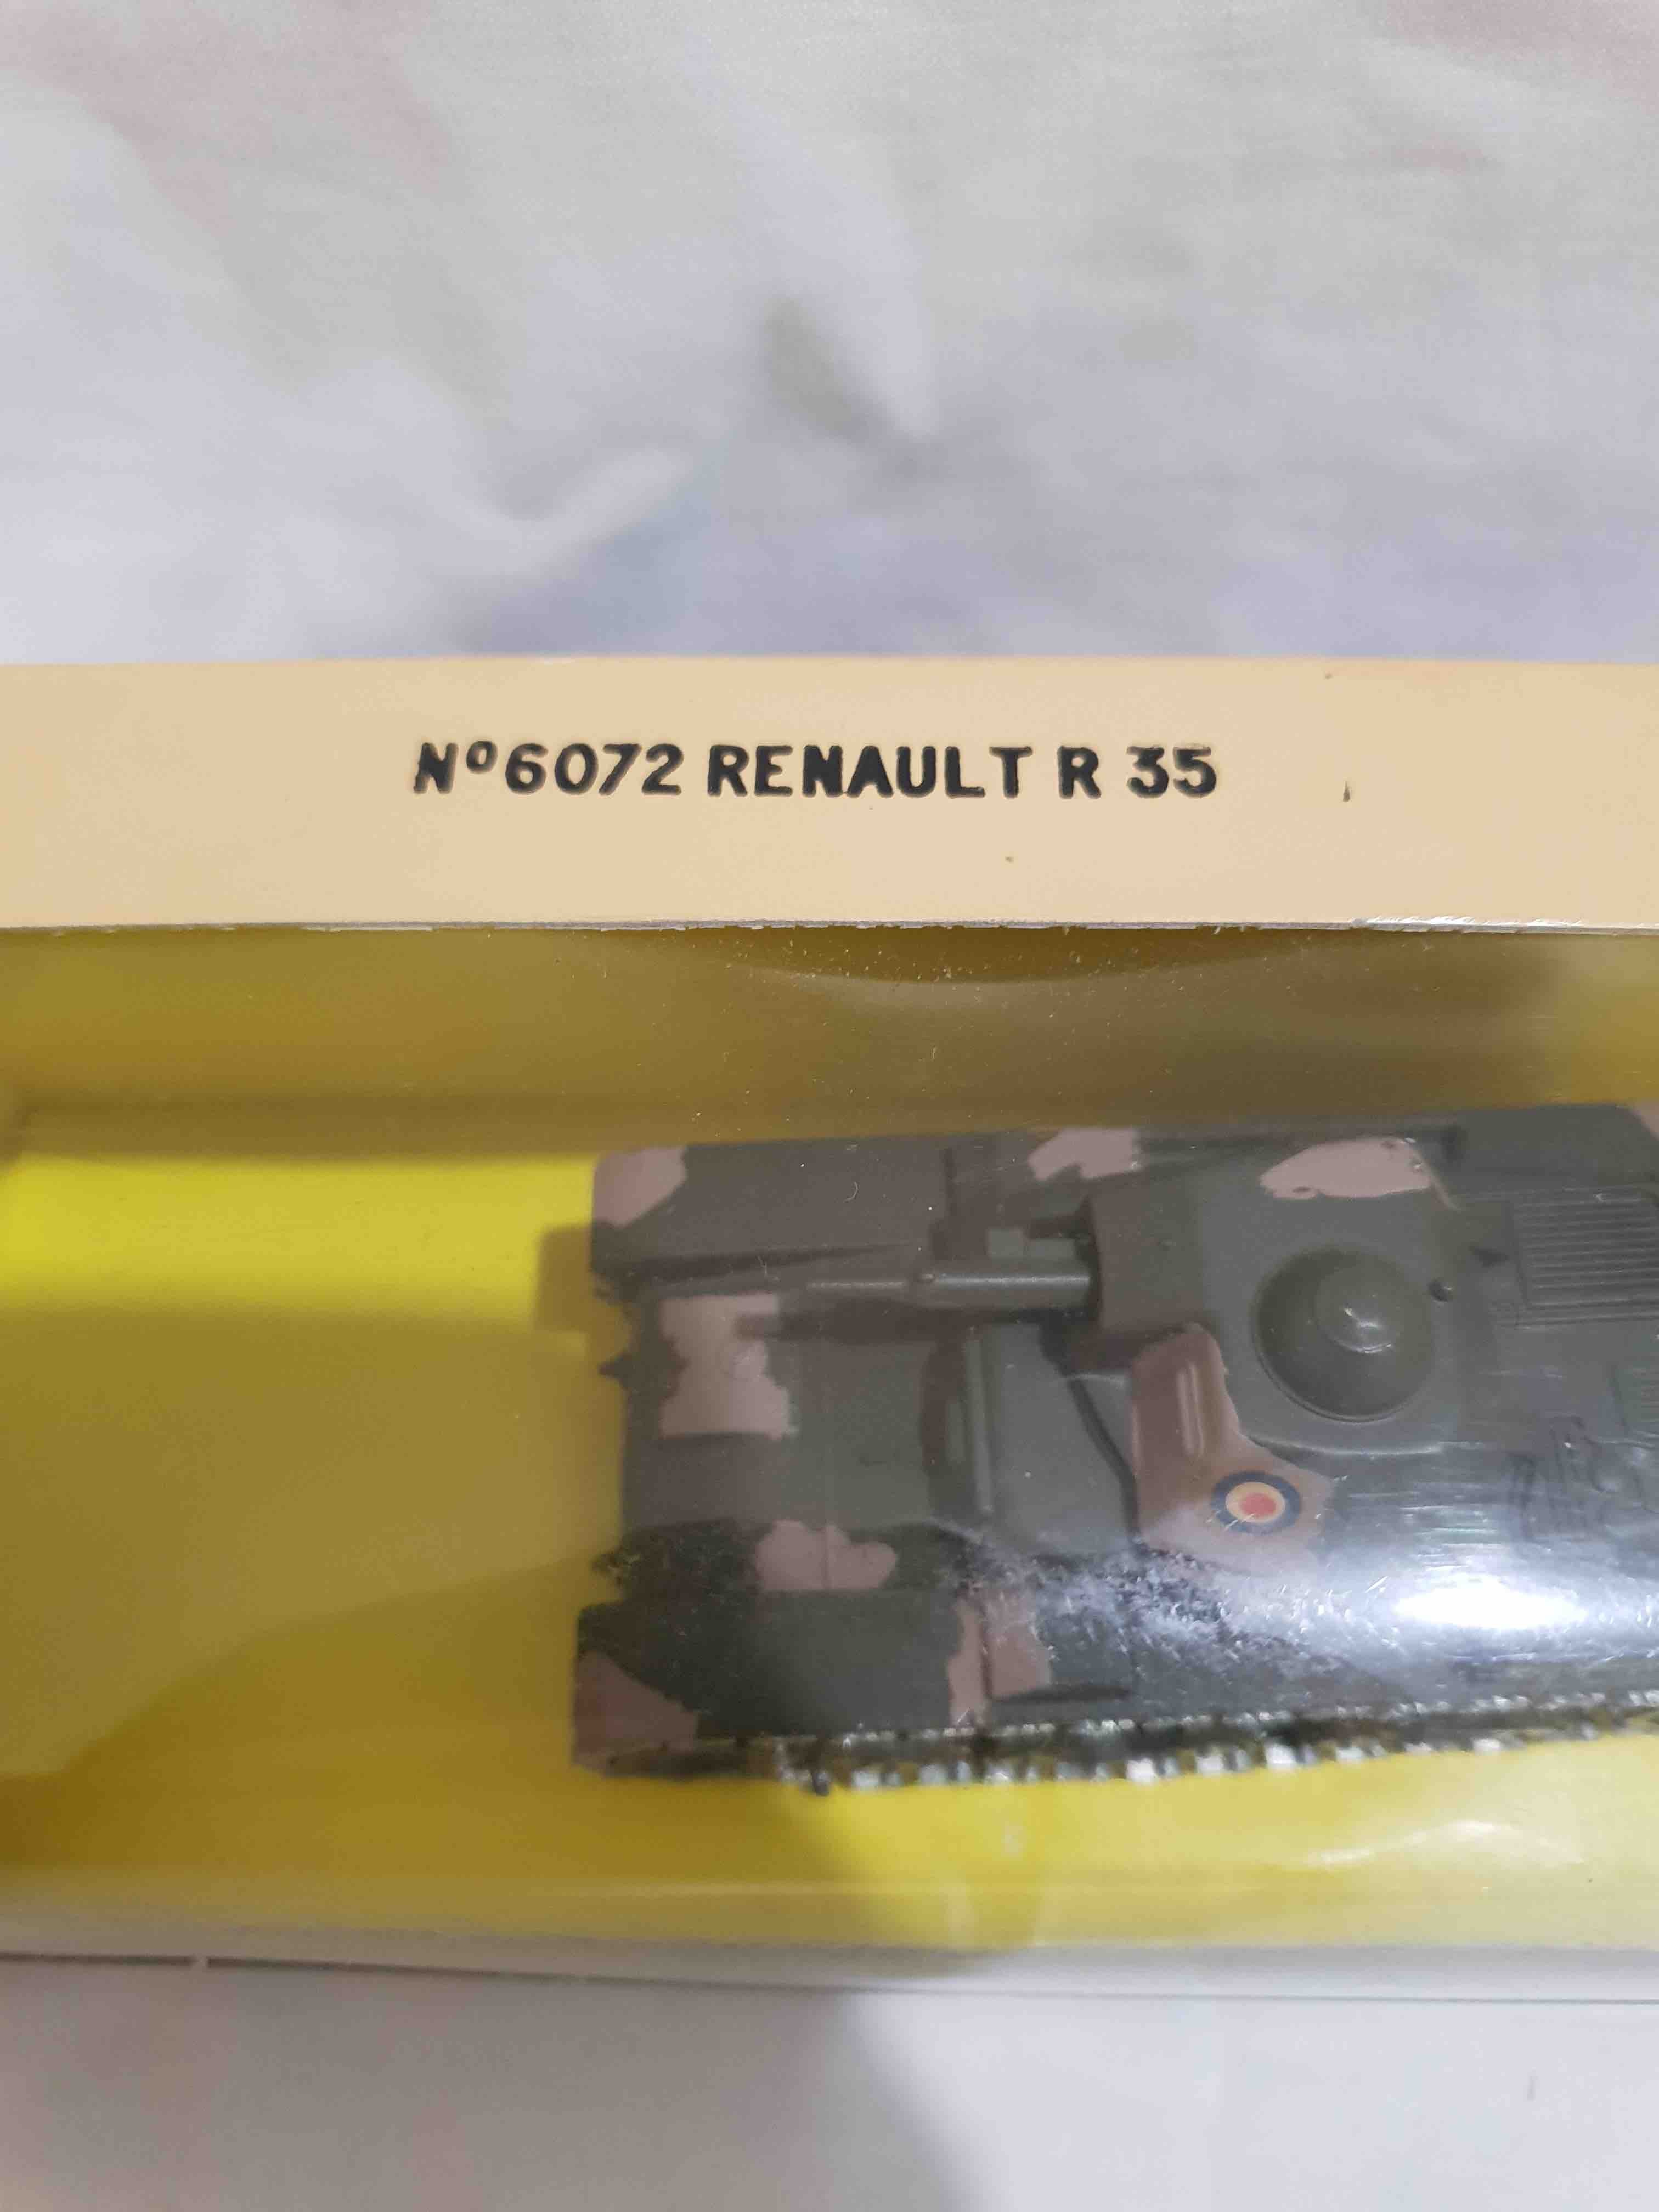 SOLIDO 6072 RENAULT R 35 COLLECTION MILITAIRE SOLIDO